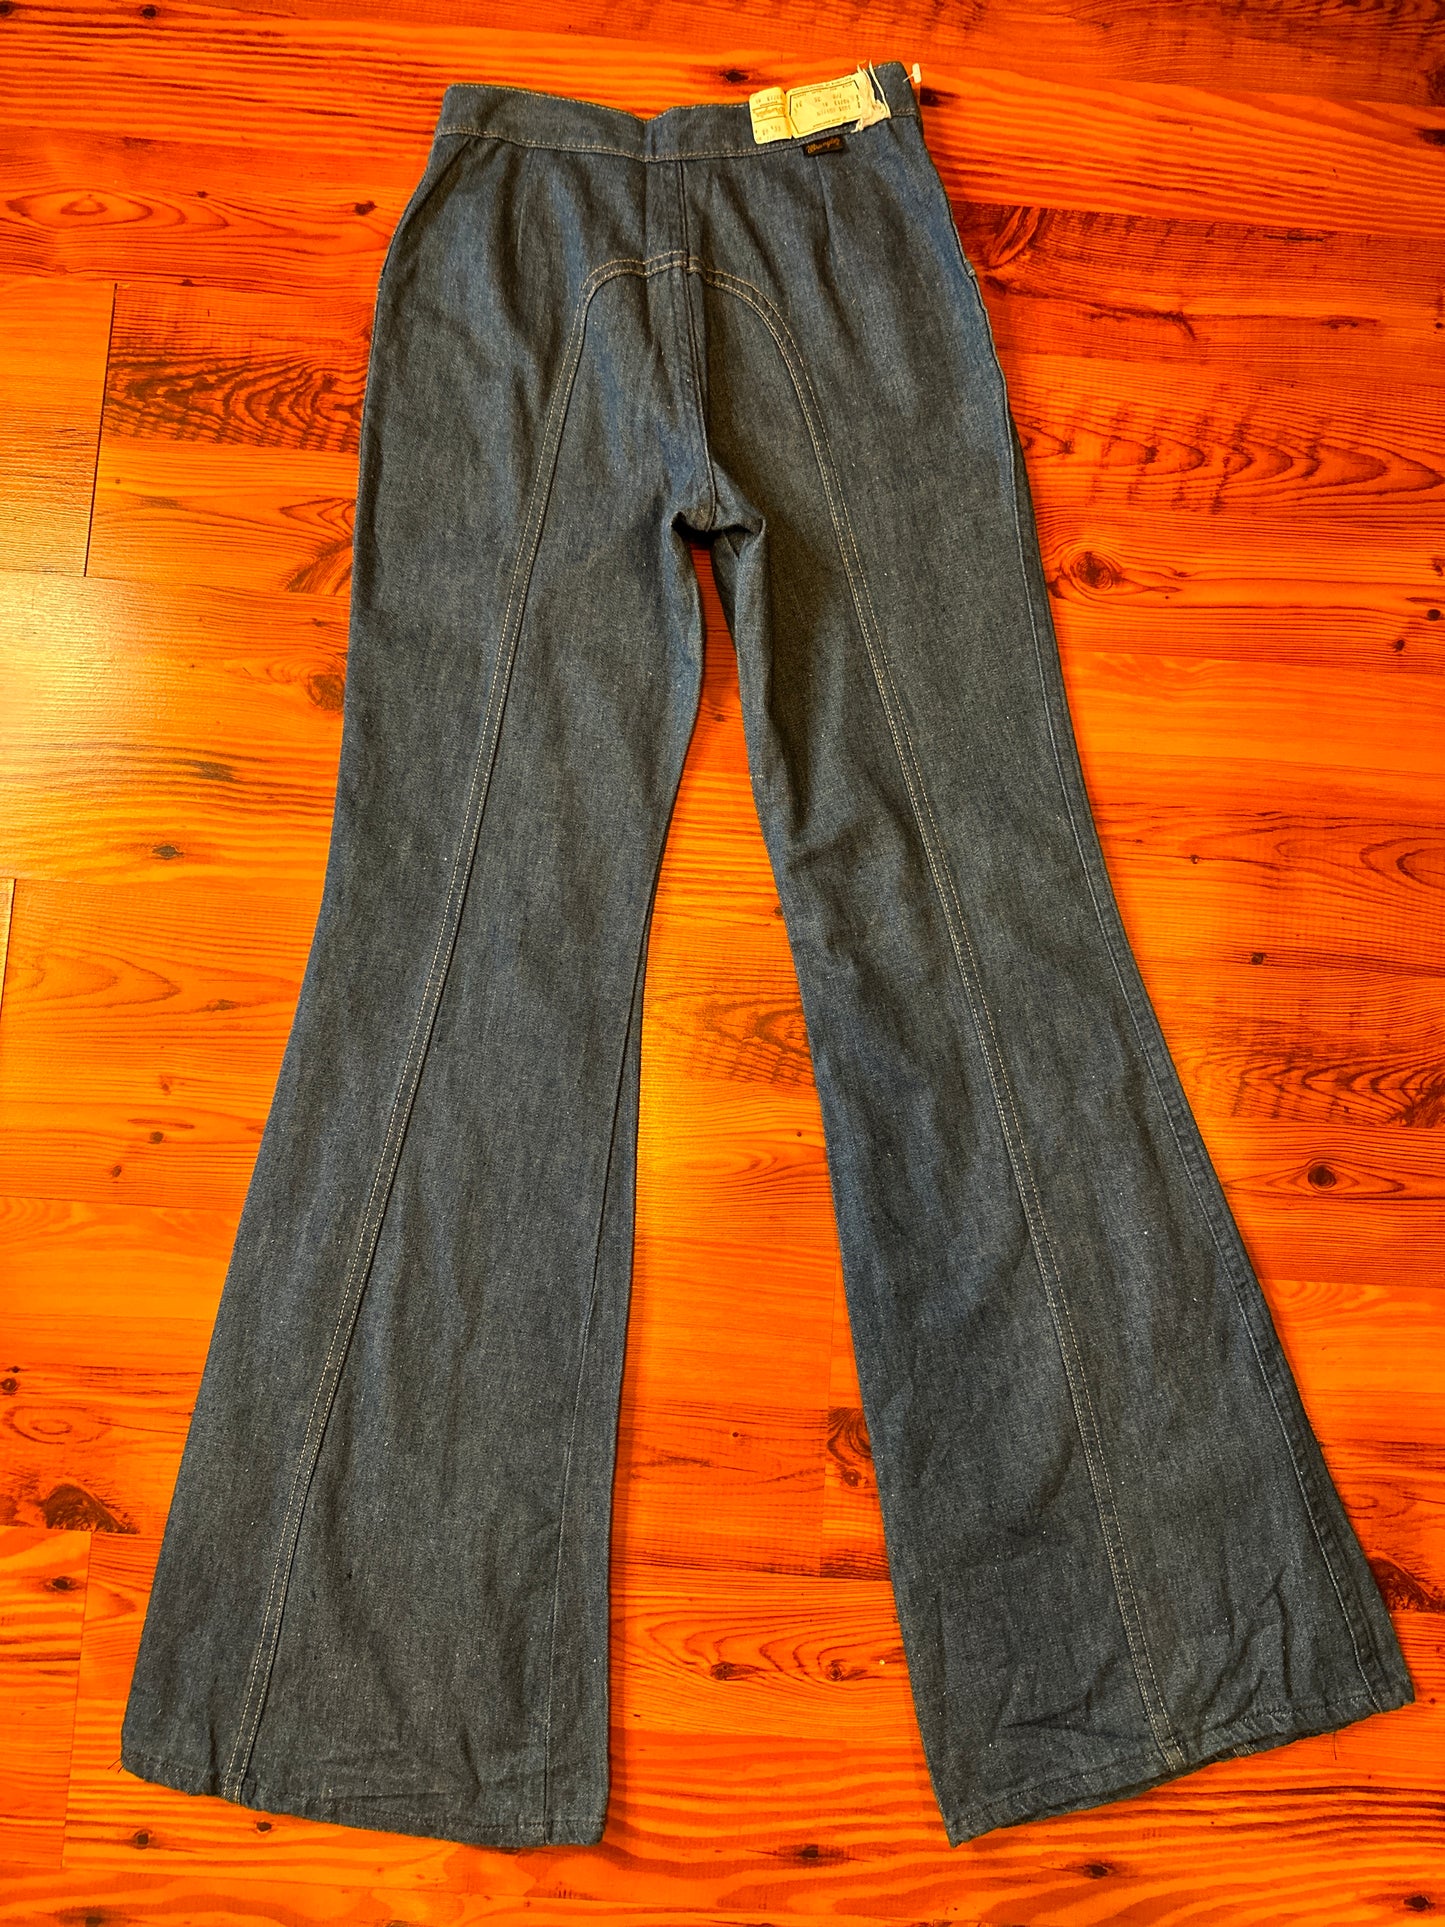 1970s Wrangler Bell Bottoms with Saddleback details - Deadstock with tags